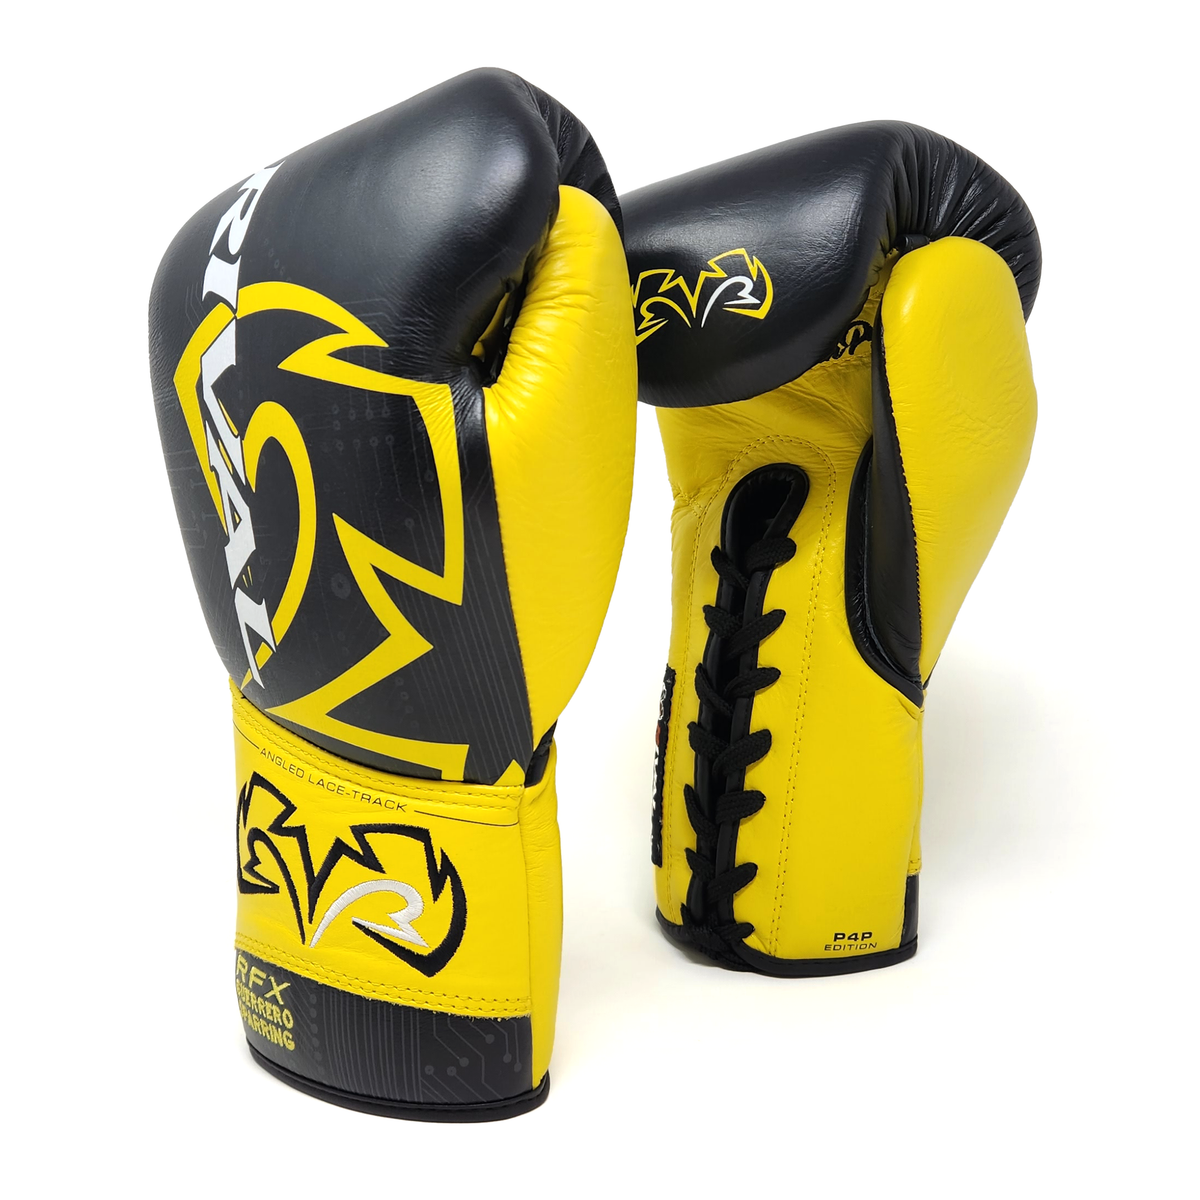 Rival RFX-Guerrero Sparring Gloves P4P Edition – Rival Boxing Gear USA